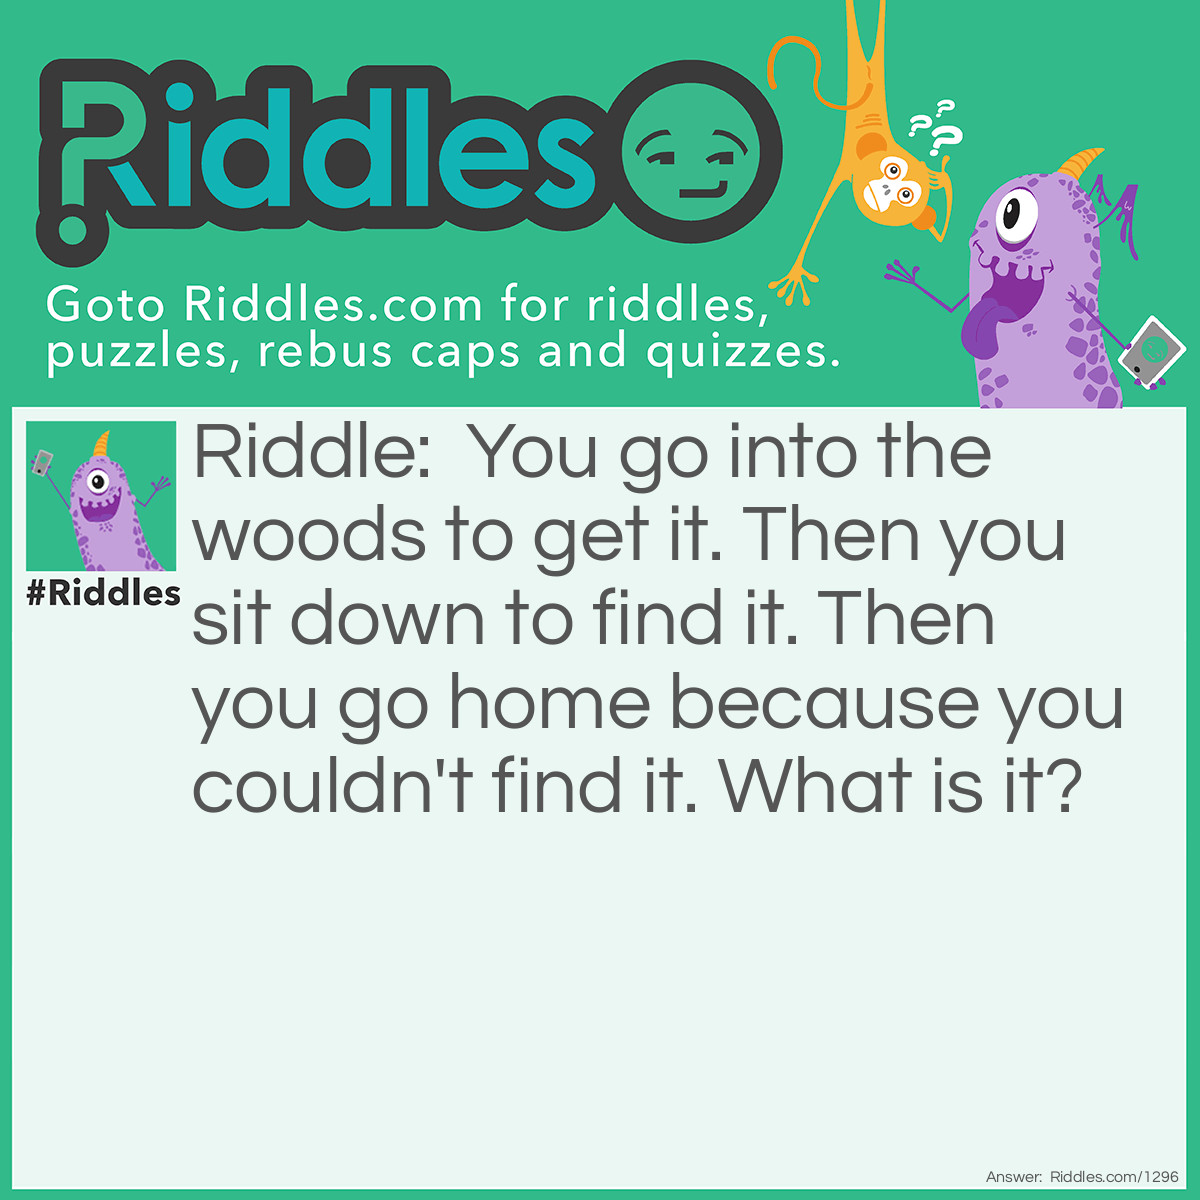 Riddle: You go into the woods to get it. Then you sit down to find it. Then you go home because you couldn't find it. What is it? Answer: A splinter.